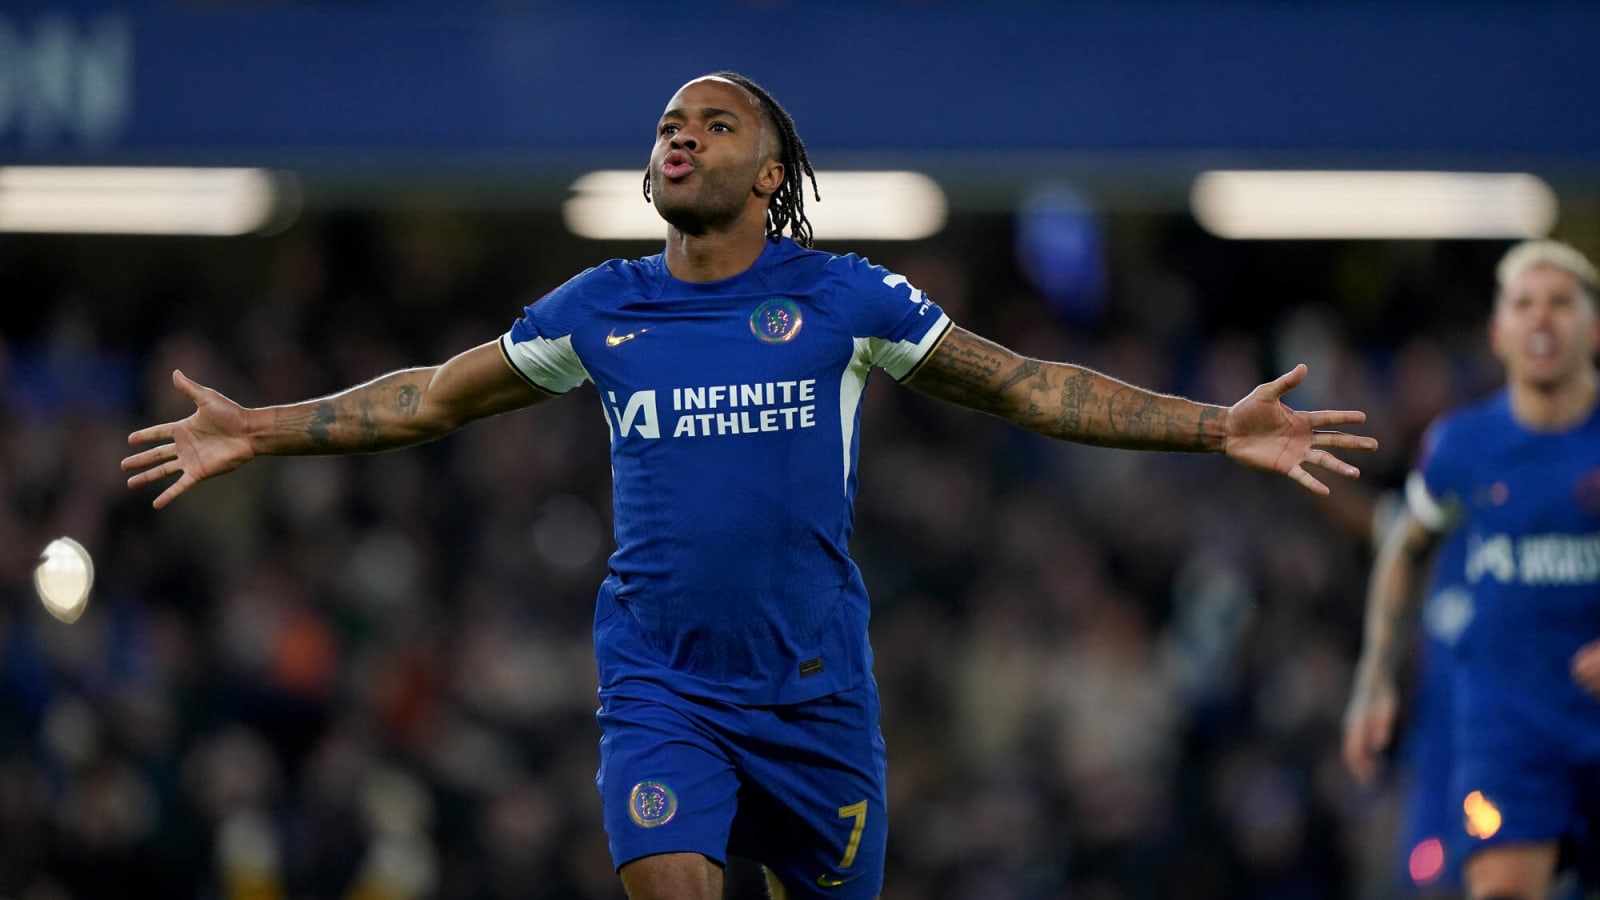 Raheem Sterling explains what Chelsea can do to avoid more nervy games like today